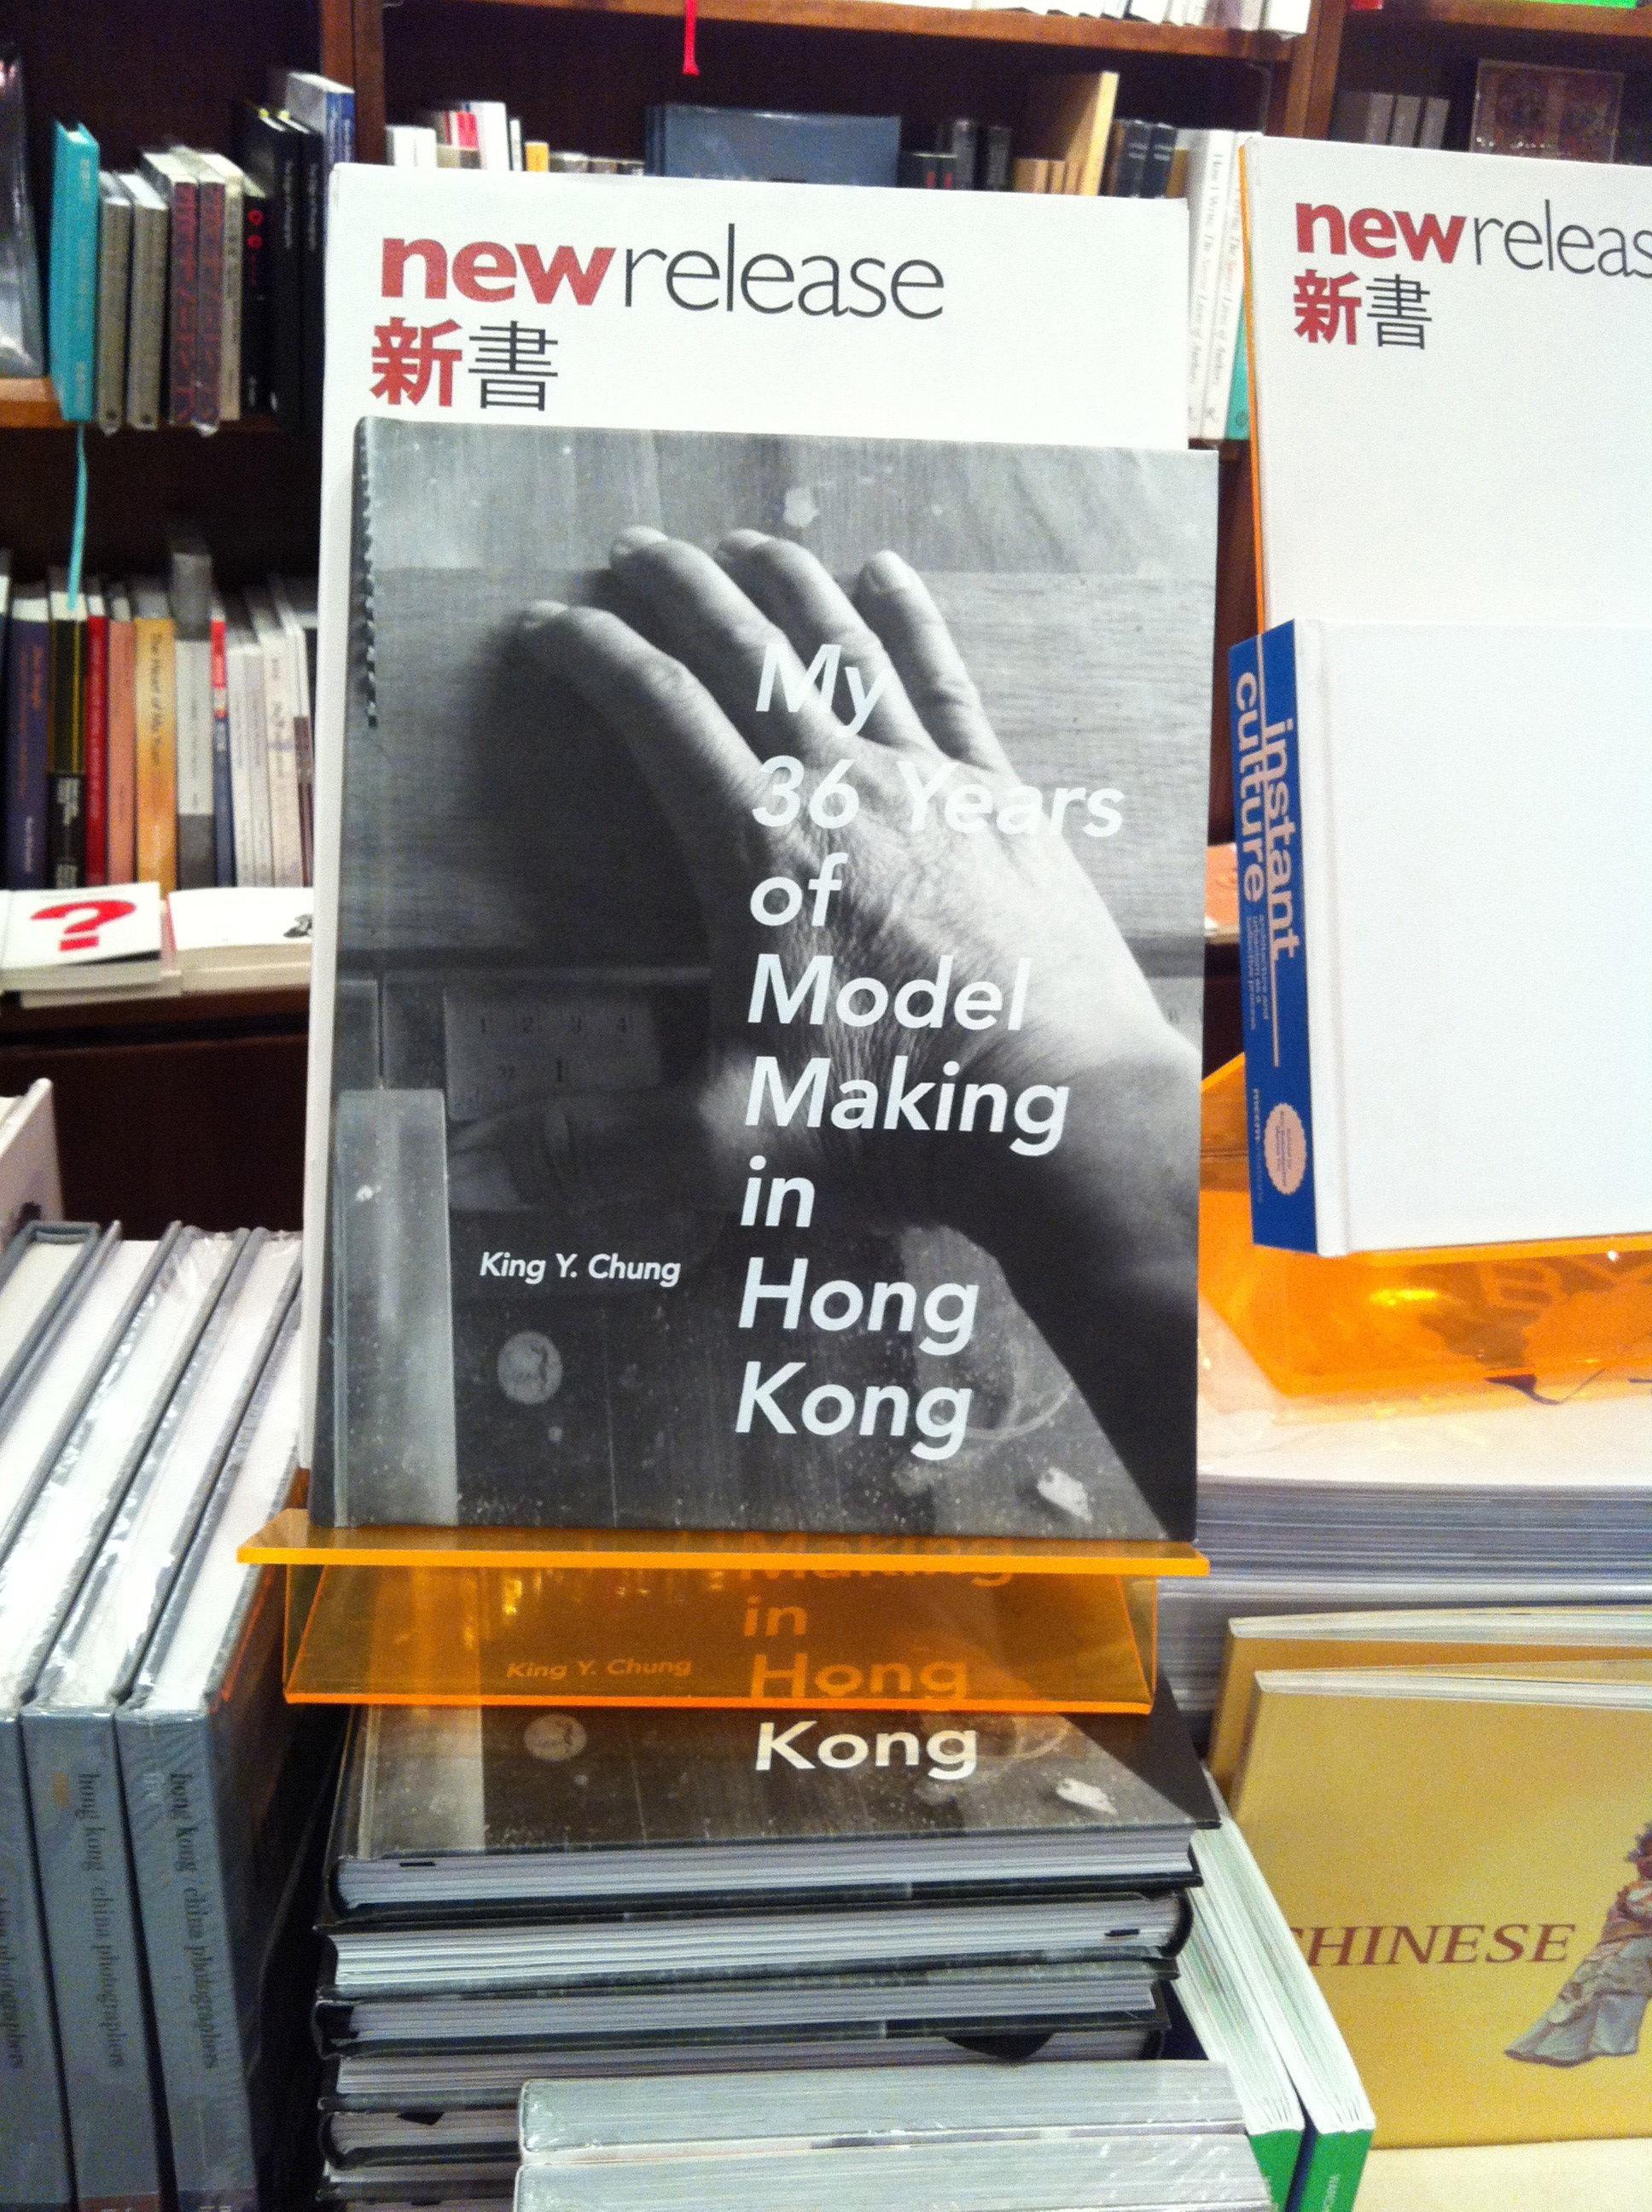 Freshly Pressed! My 36 Years of Model-making - by King Y. Chung